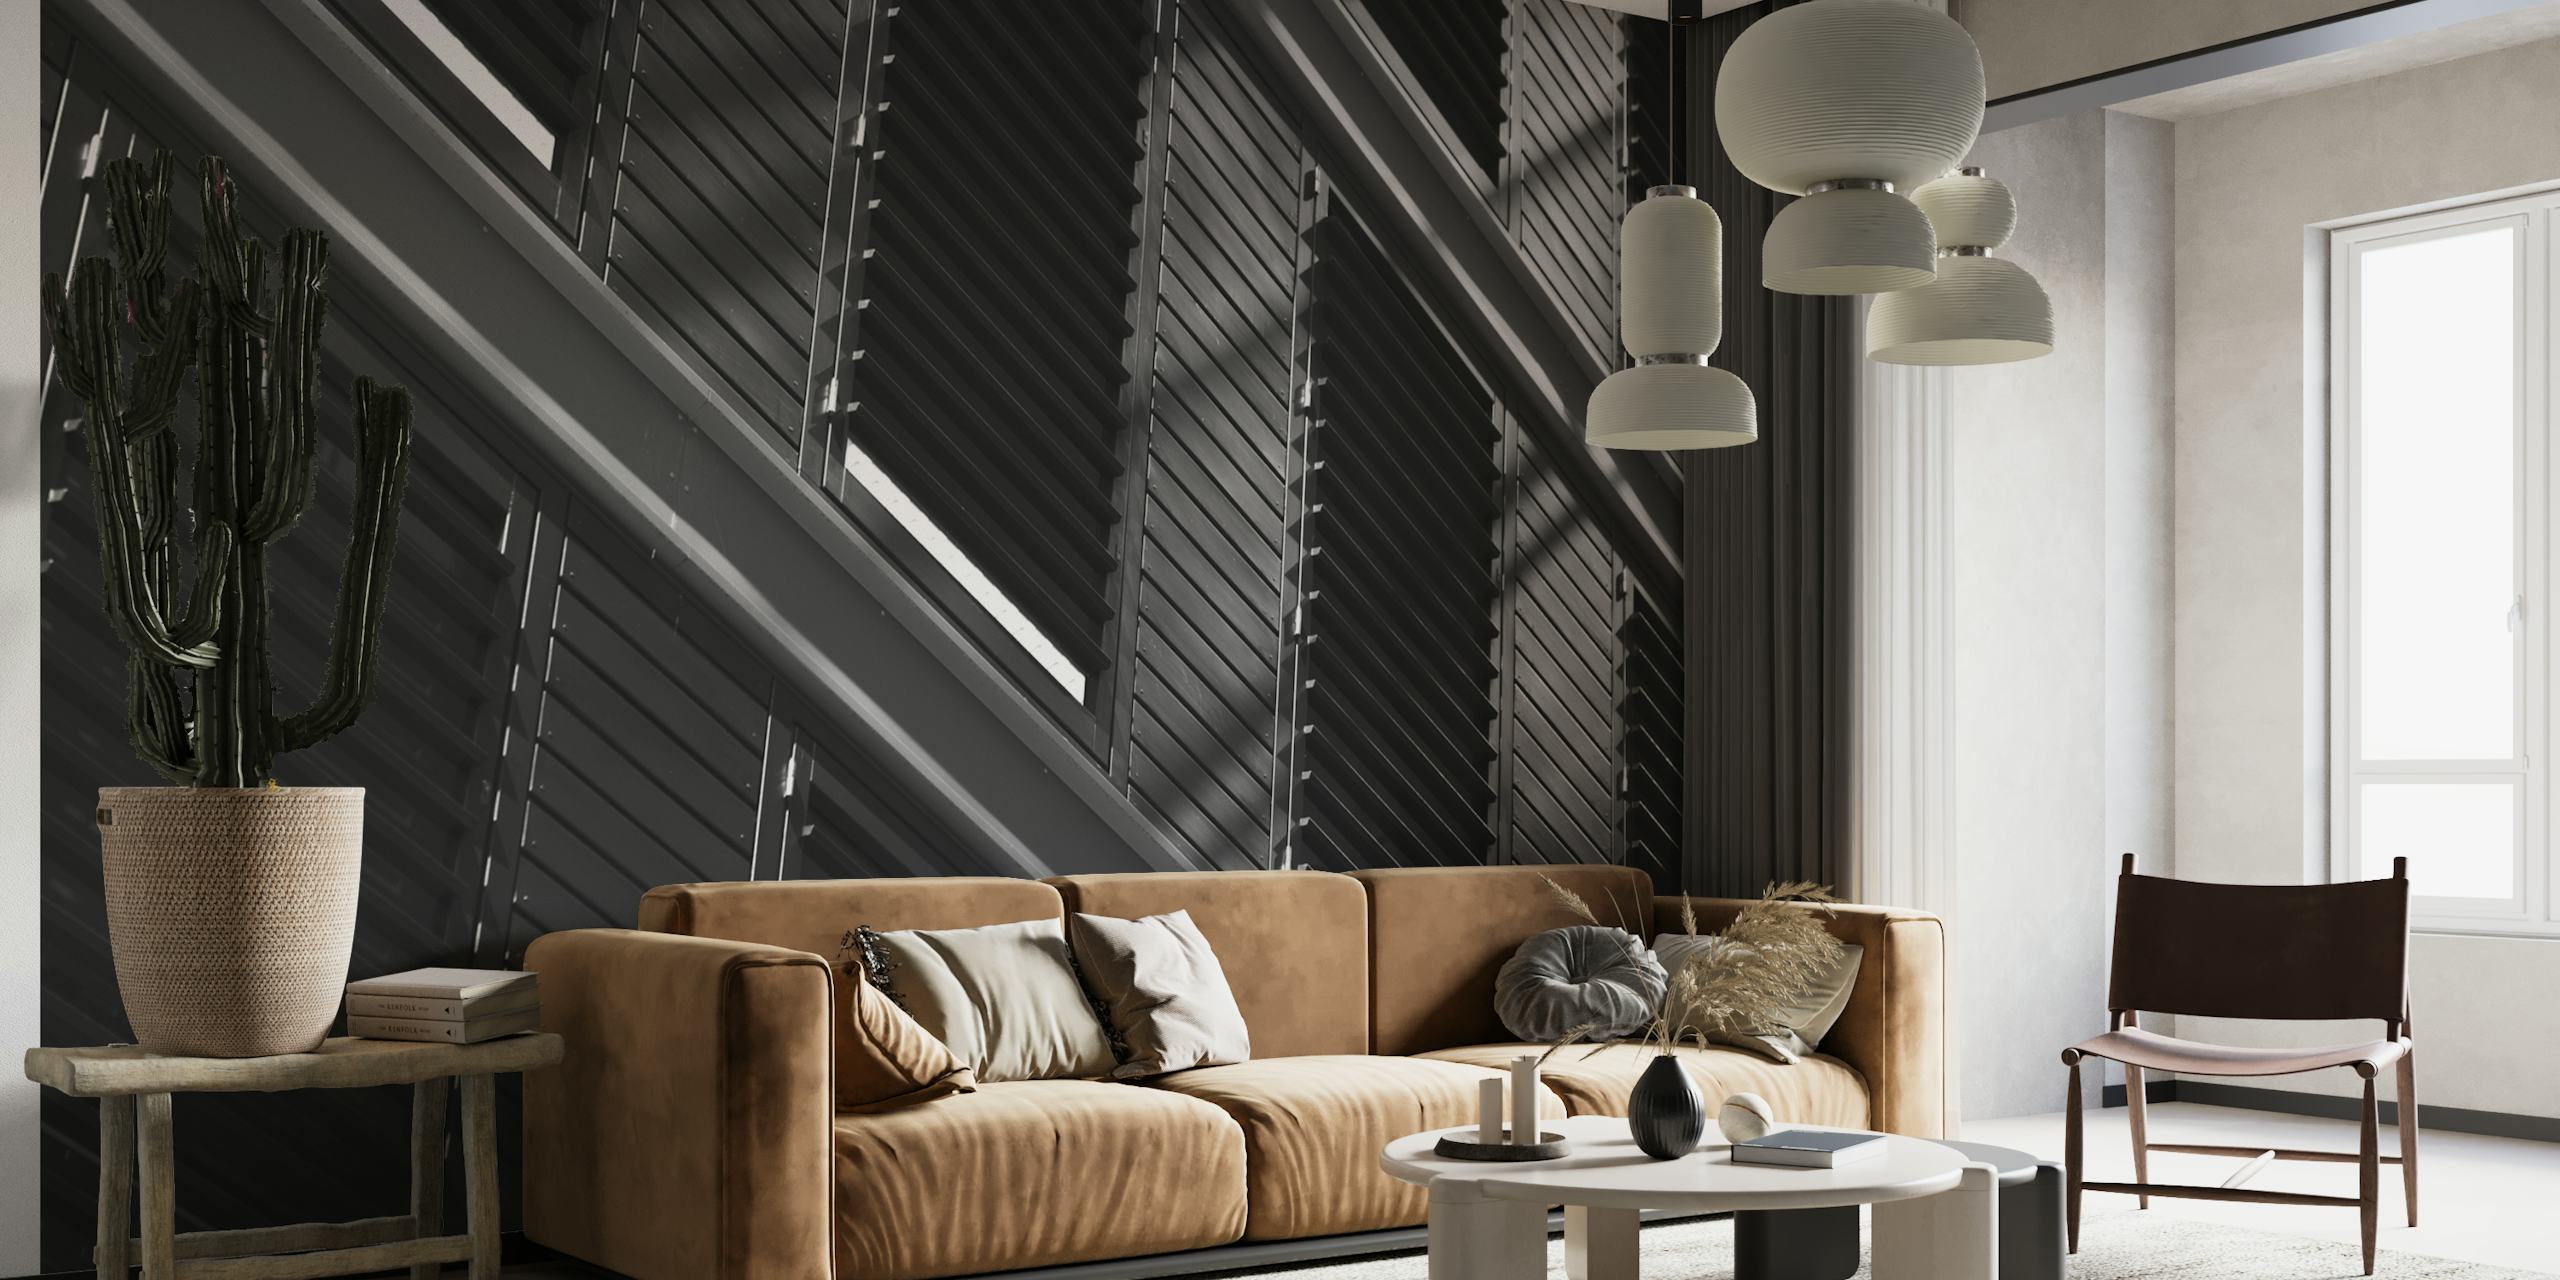 Monochrome blinds and shadows wall mural